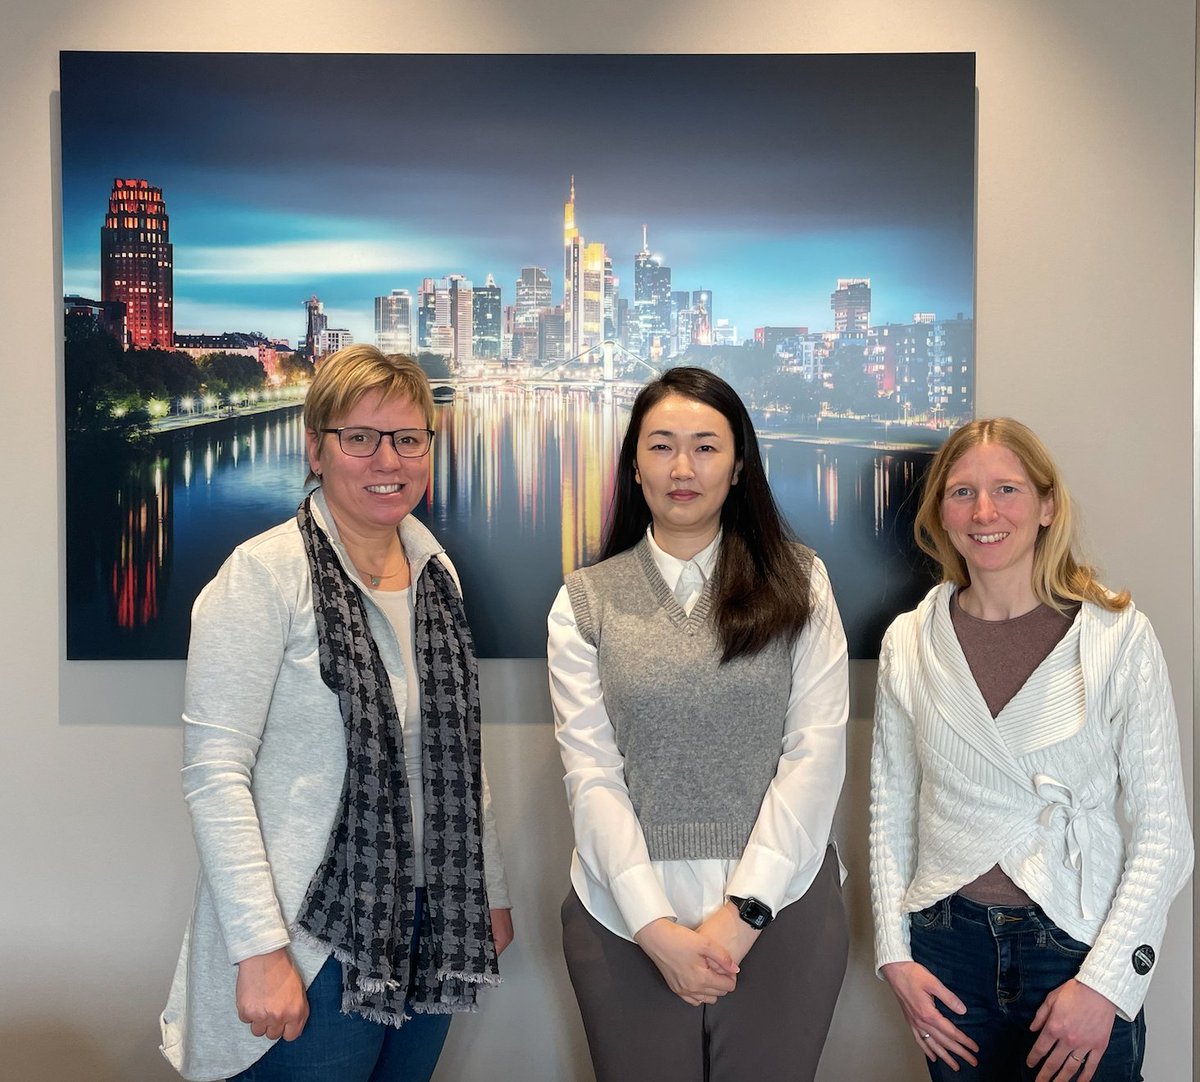 Great pleasure to host Minji Kang from STEPI/Science & Technology Institute (Republic of Korea) to exchange about R&D #cluster structures to boost innovation & technology transfer. #clusters4future #Zukunftscluster @BMBF_Bund @HMWK_Hessen @goetheuni @HTAI_Hessen @Donghyuk_Shin_